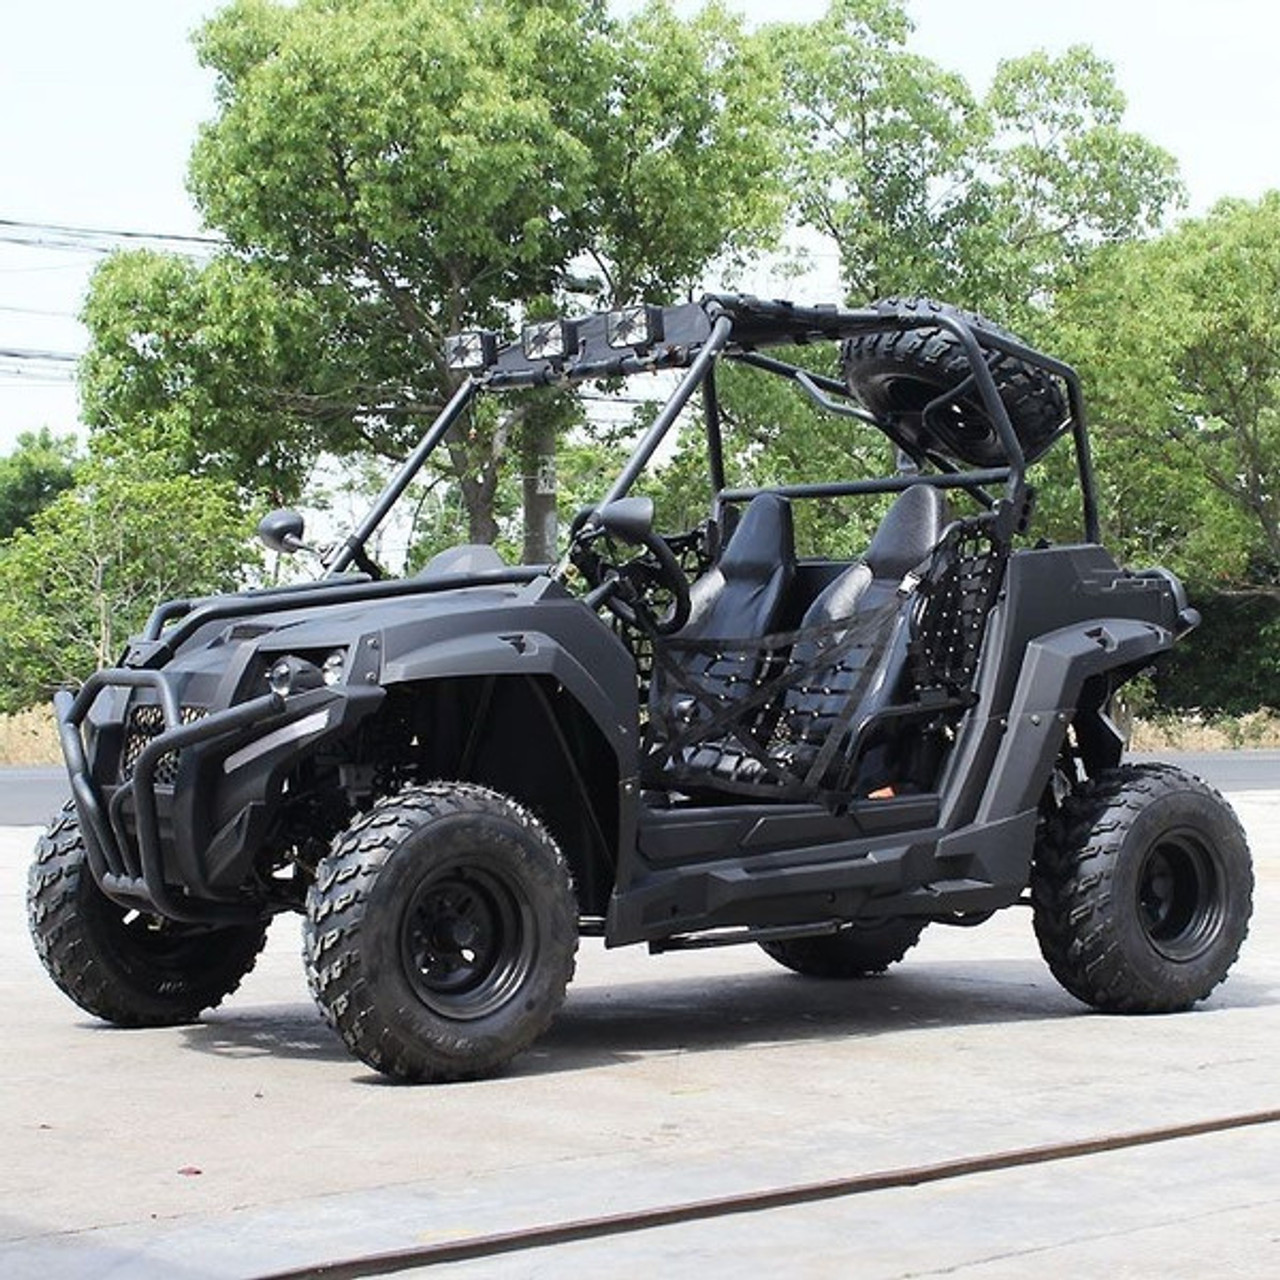 DongFang 200Cc DF GKV-N Full Adult Gas UTV Go-Kart, Side By Side With Automatic W/ Reverse